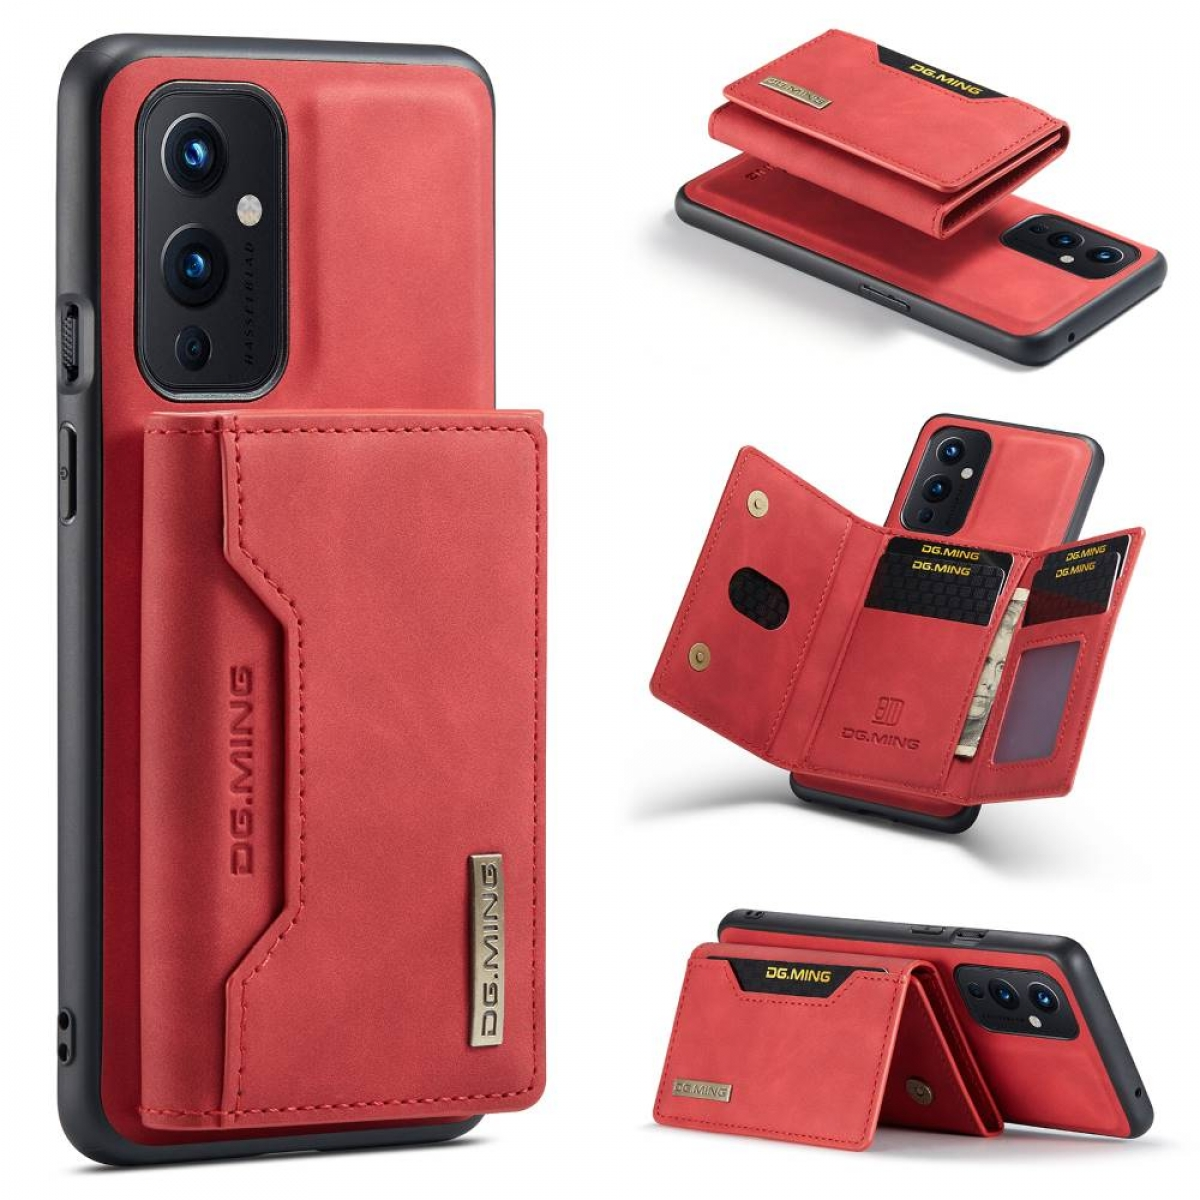 M2 DG OnePlus, MING 2in1, 9, Rot Backcover,